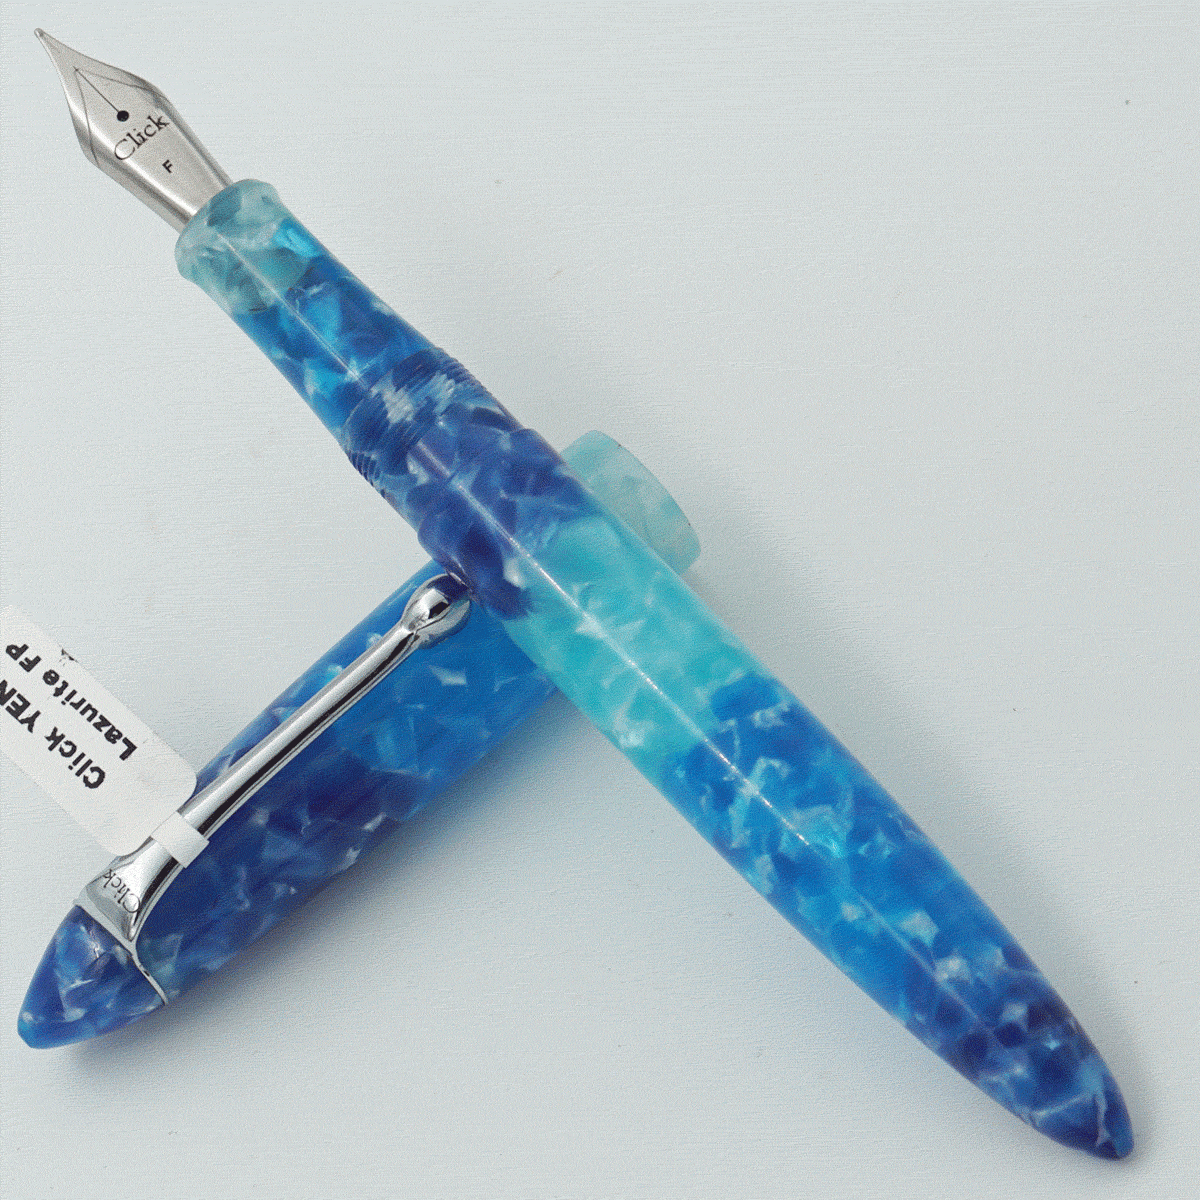 Click YEN Lazurite Sky Blue With Blue Color Acrylic Body And Cap Silver Color Clip No 35 Fine Nib  Eye Dropper Model Fountain Pen (3 in 1) (Nib Can be Customised) SKU 24012